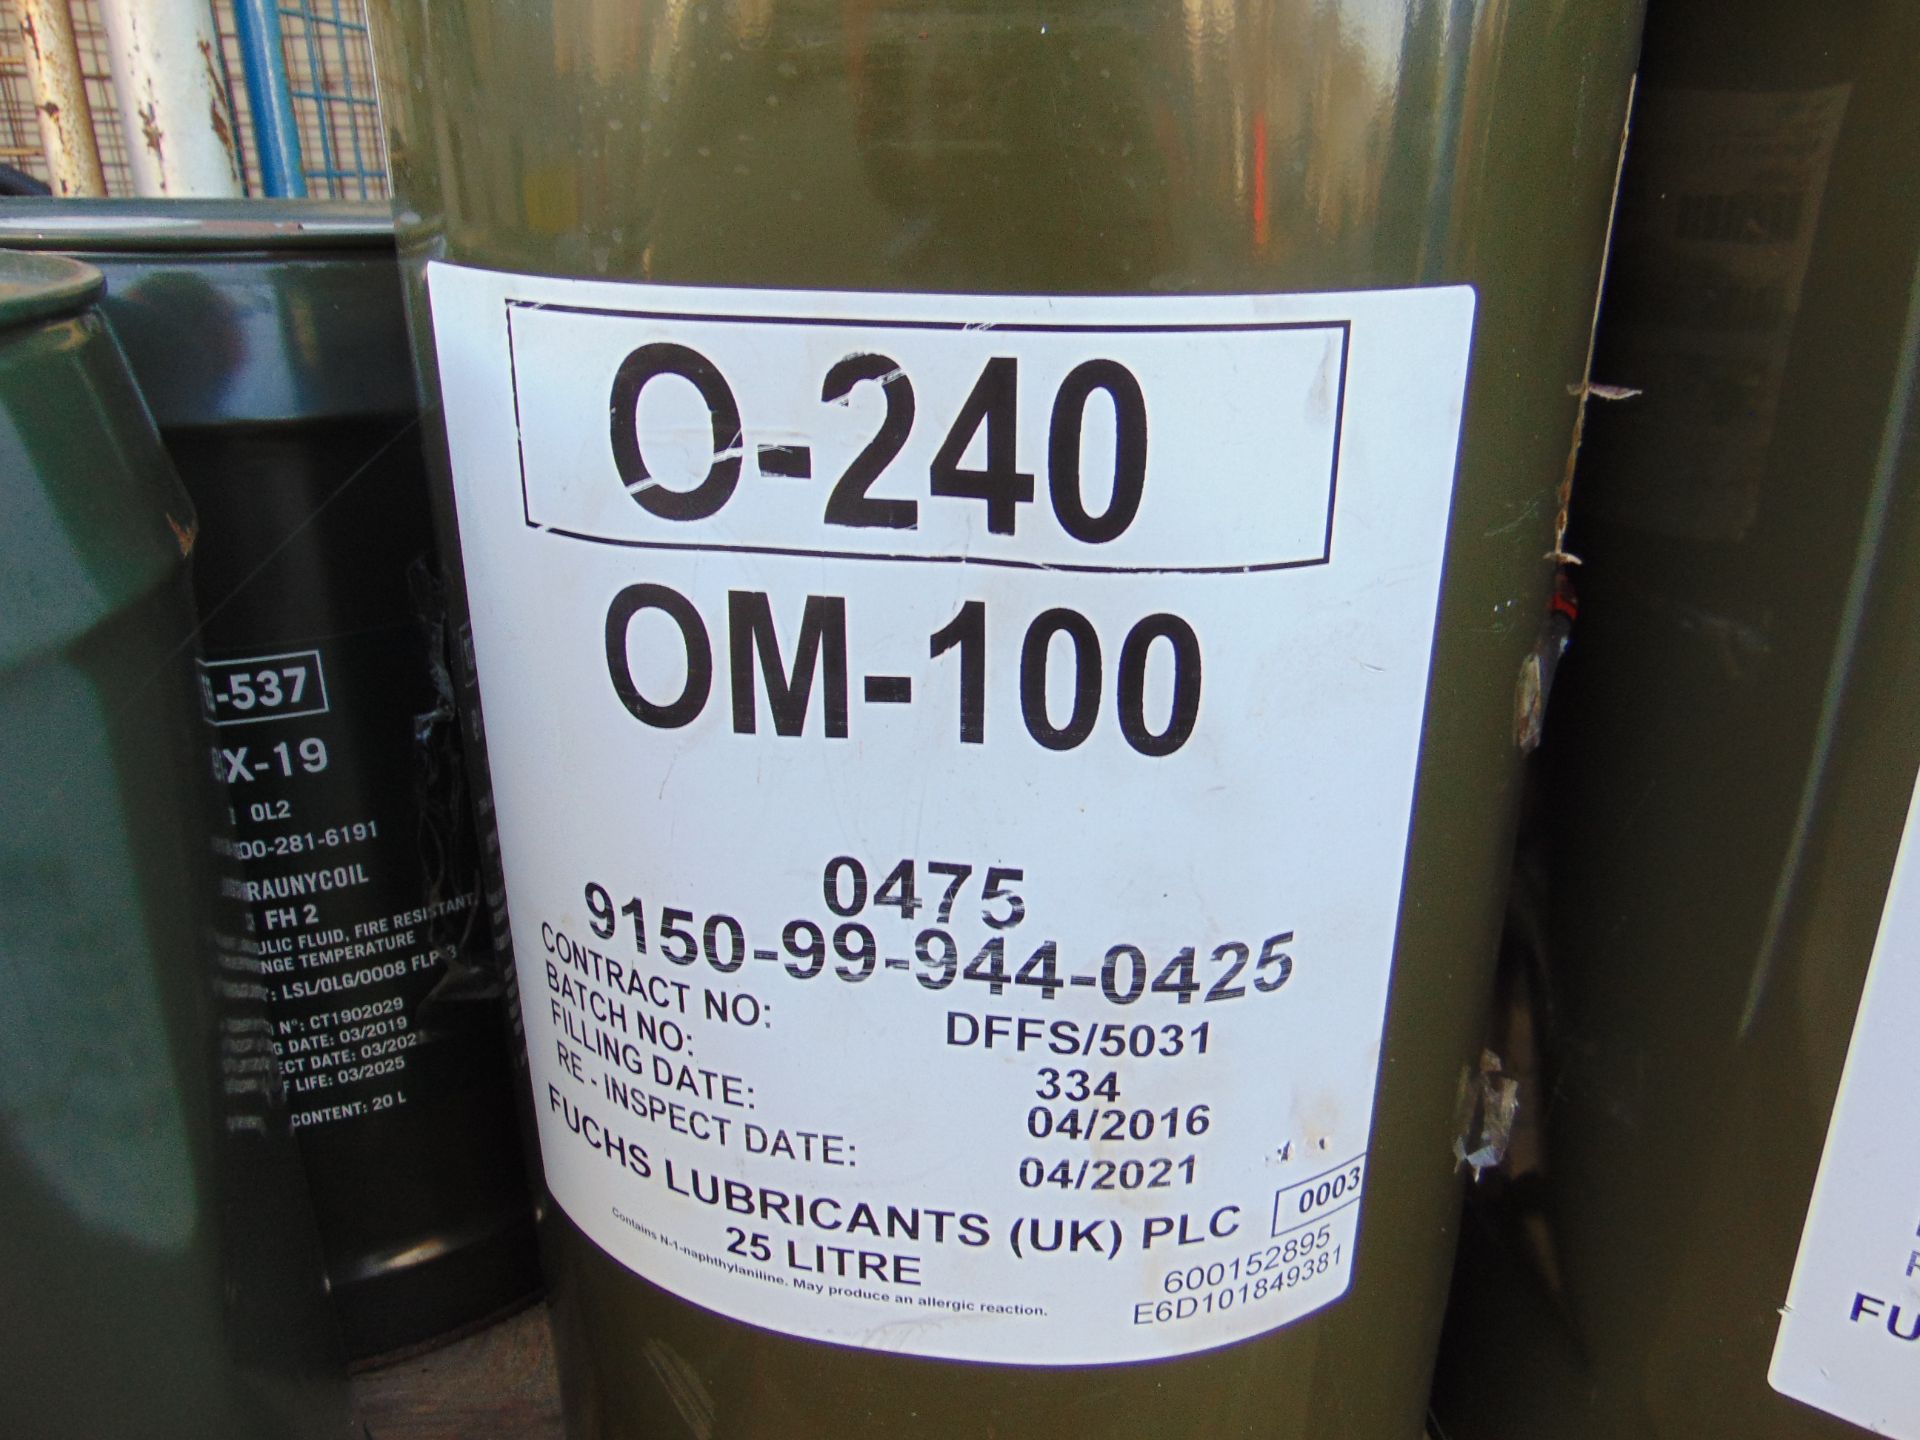 1x 25 litre Drum of OM-100 High Quality Mineral Based Lubricating Oil - Image 2 of 2